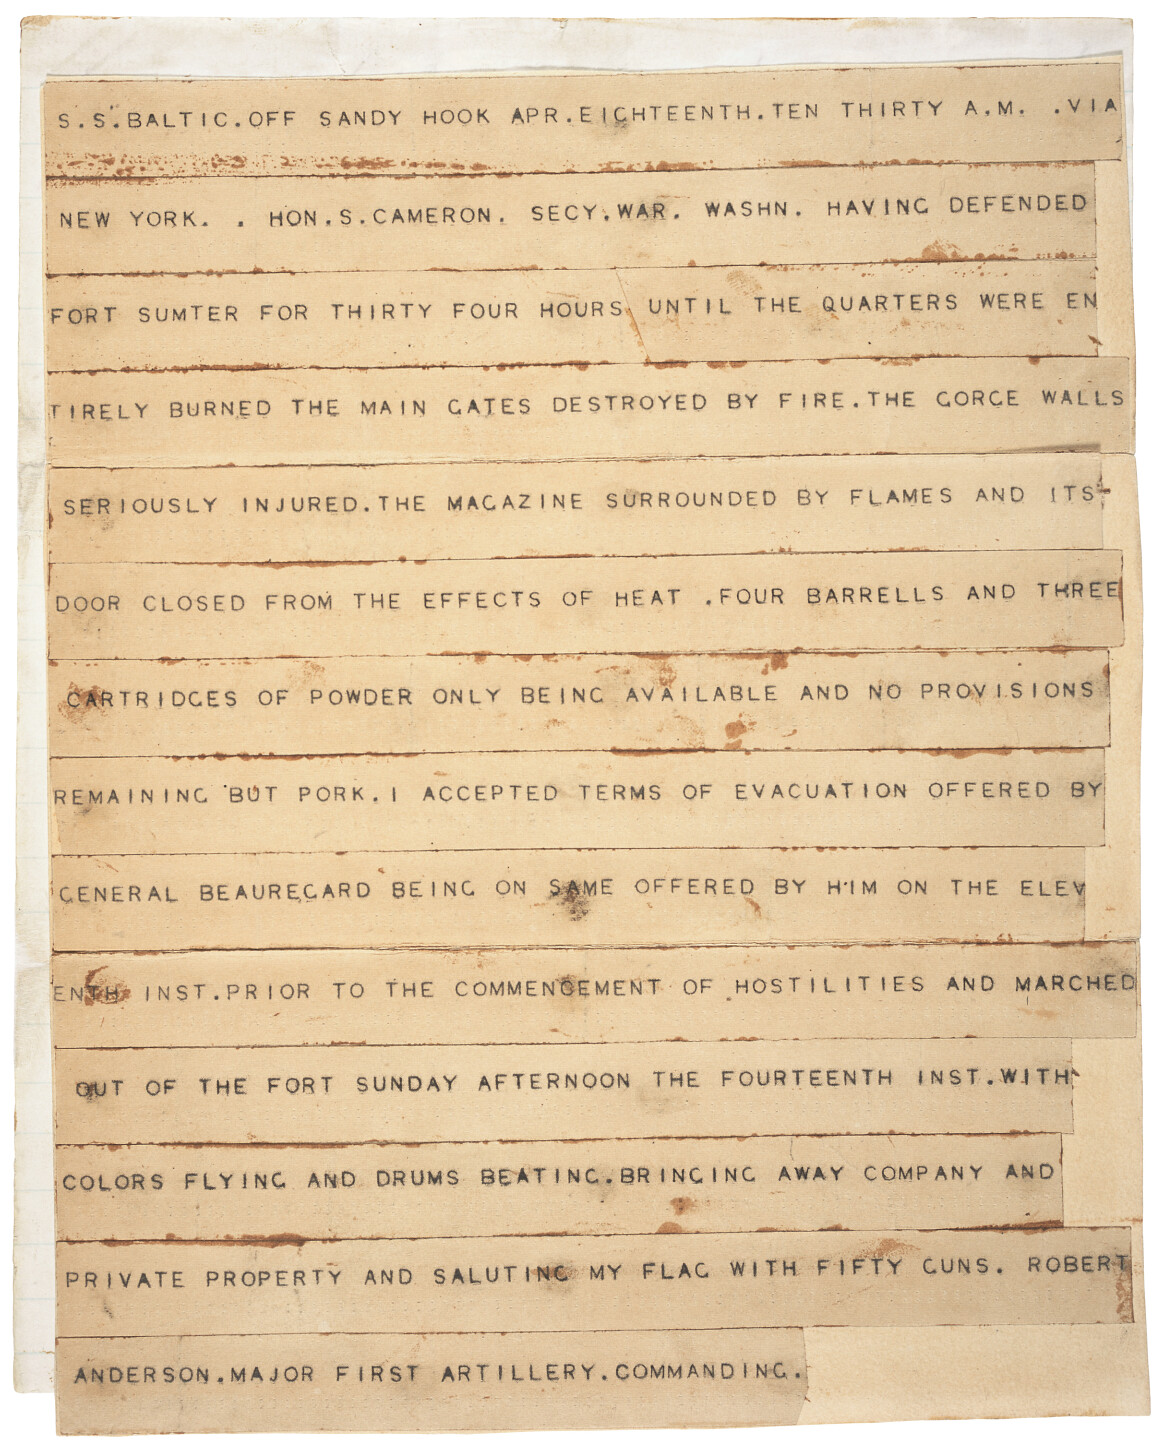 Robert Anderson Telegram to the Secretary of War, April 18, 1861, from S.S. Baltic off Sandy Hook, New York